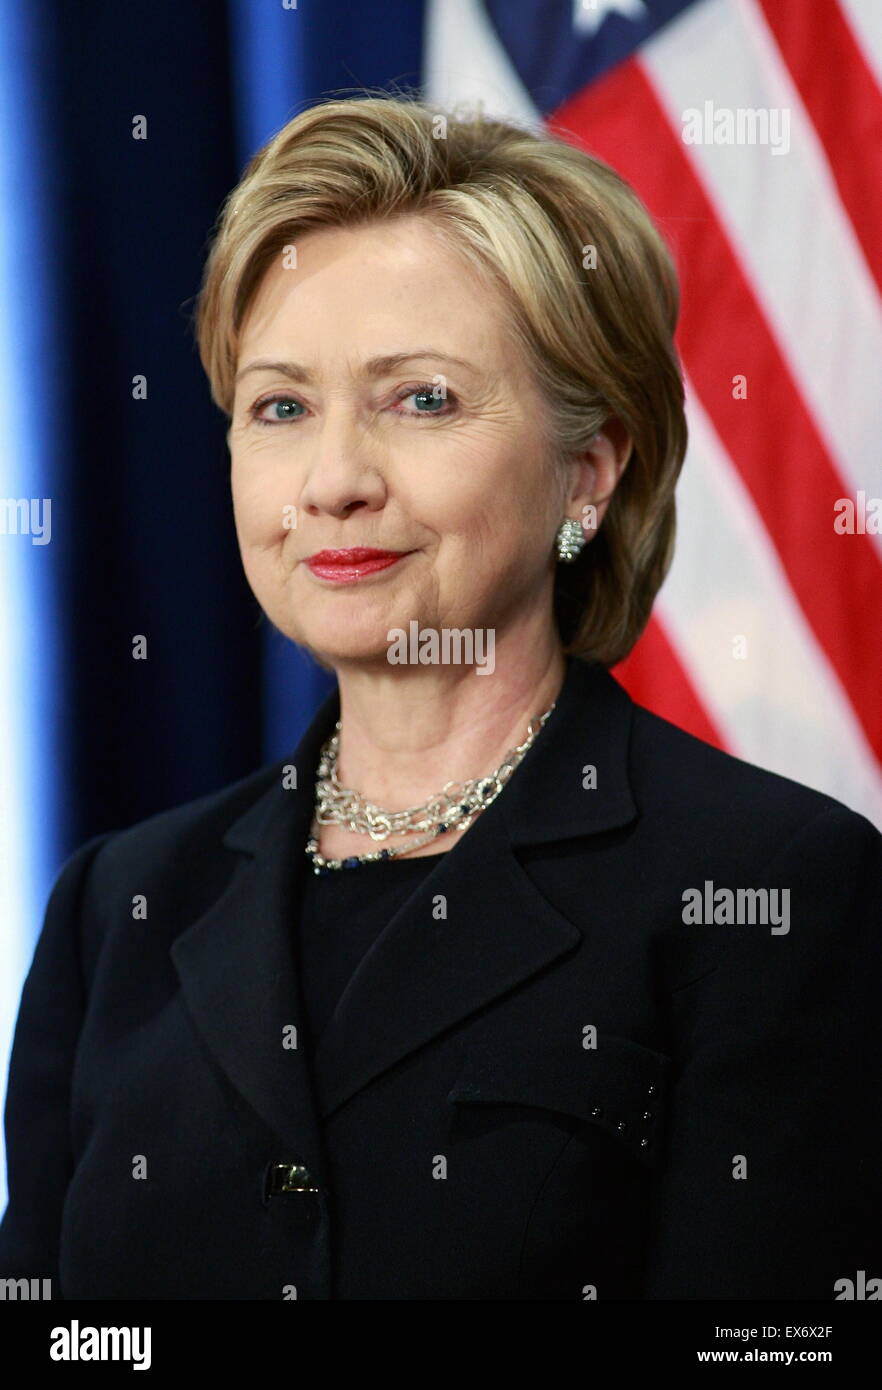 Hillary Diane Rodham Clinton (born October 26, 1947) former United States Secretary of State, U.S. Senator, and First Lady of the United States. From 2009 to 2013, she was the 67th Secretary of State Stock Photo